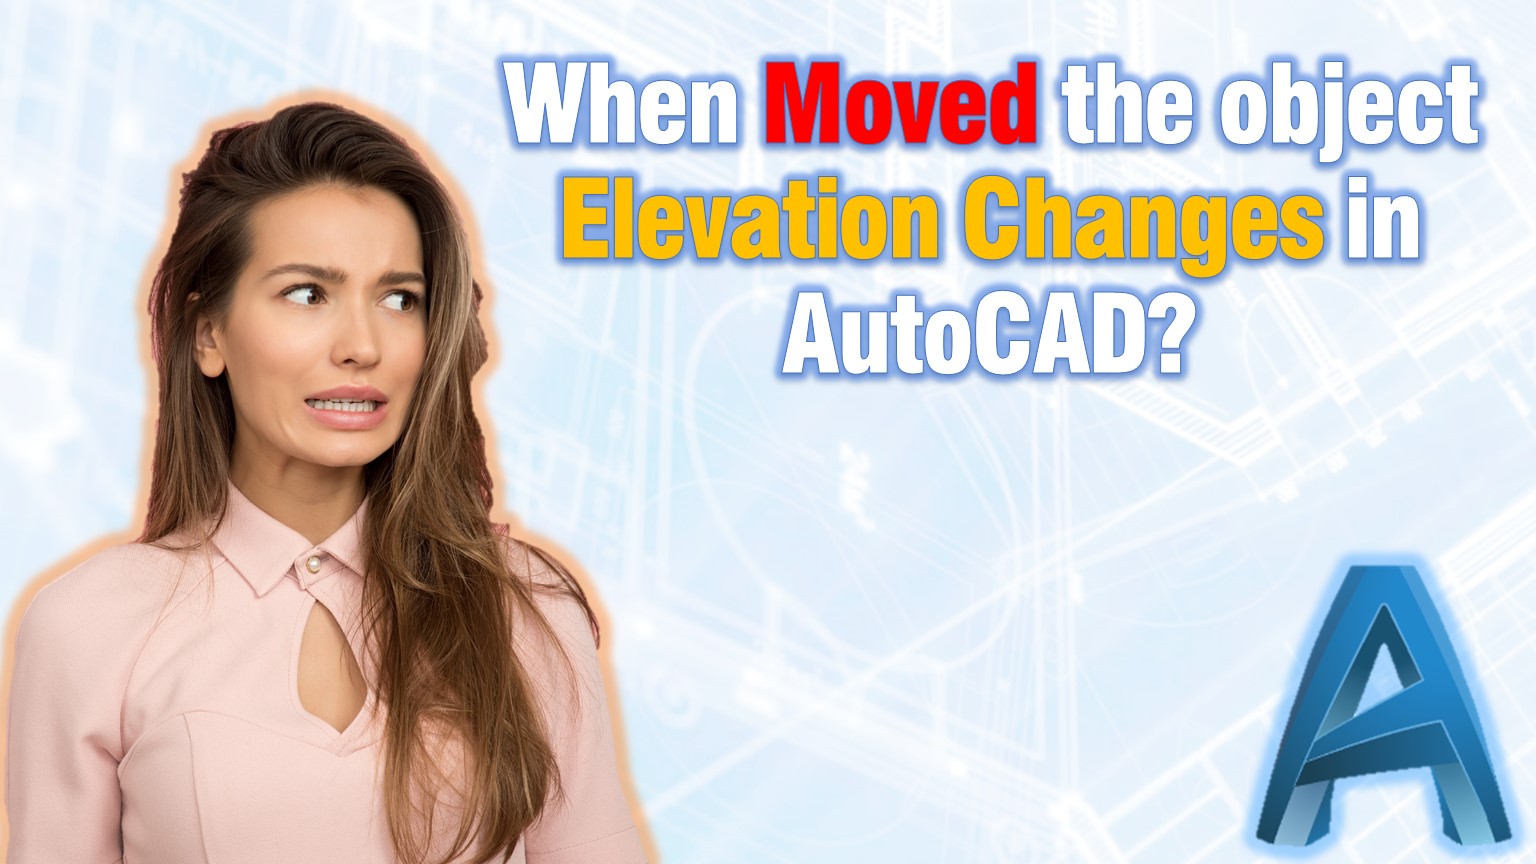 Move changes elevations in AutoCAD